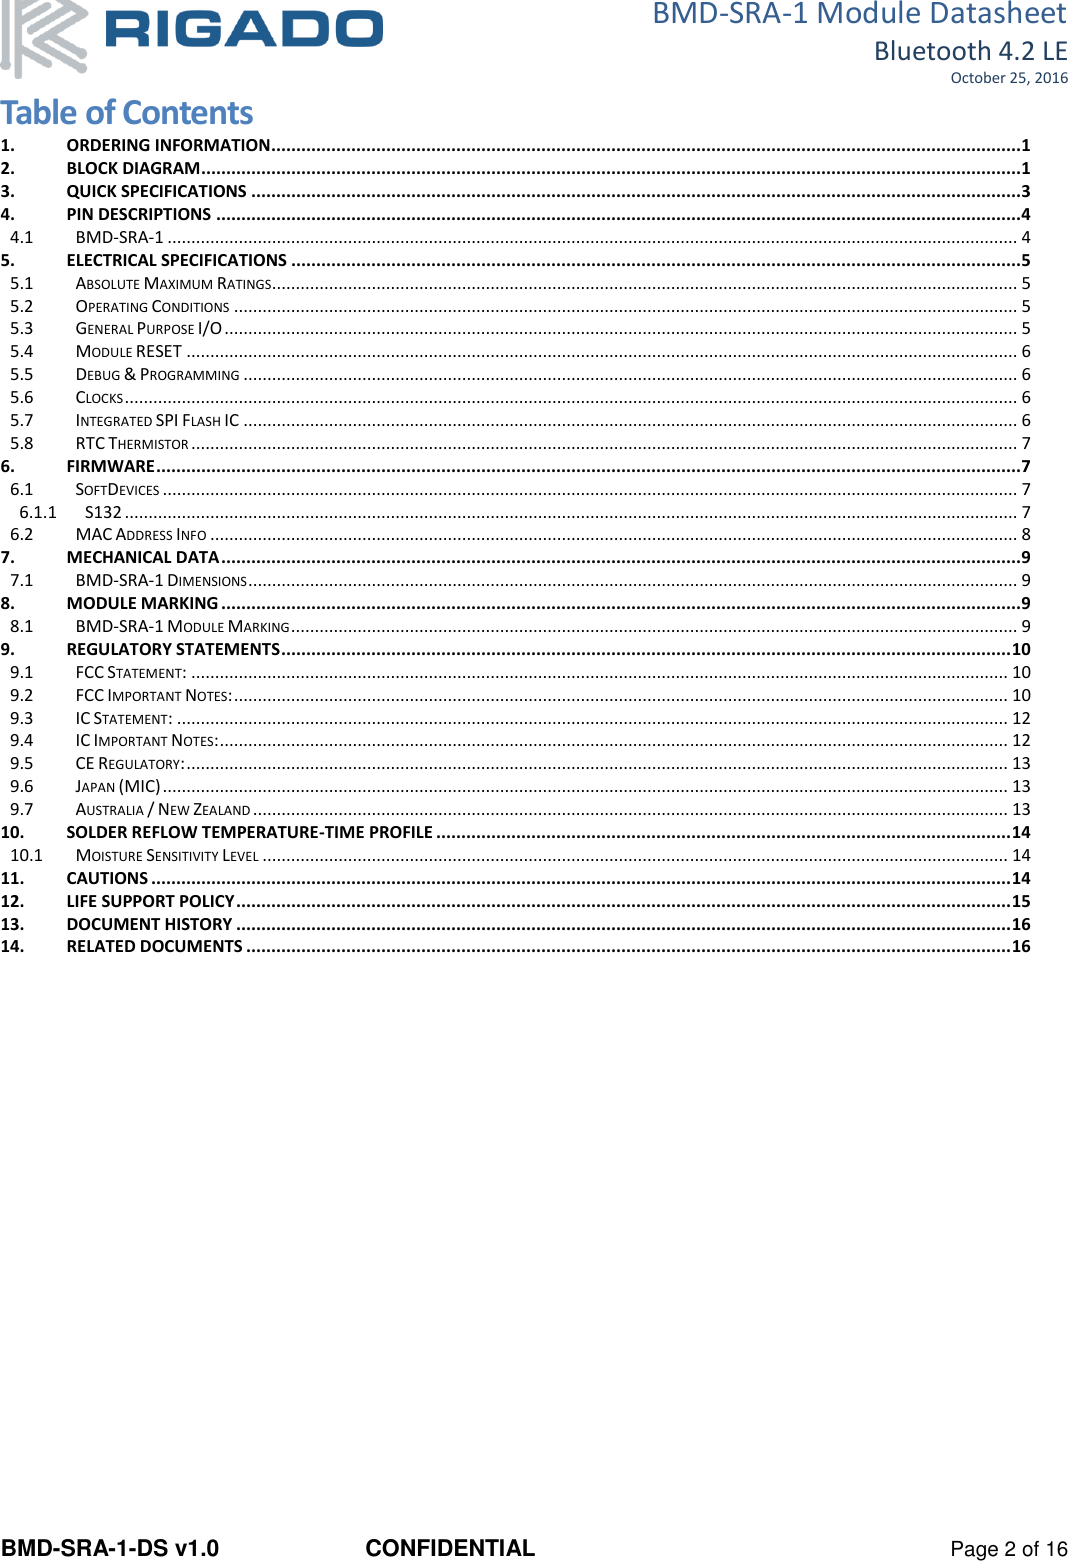 BMD-SRA-1 Module Datasheet Bluetooth 4.2 LE October 25, 2016 BMD-SRA-1-DS v1.0  CONFIDENTIAL  Page 2 of 16 Table of Contents 1. ORDERING INFORMATION...................................................................................................................................................... 1 2. BLOCK DIAGRAM .................................................................................................................................................................... 1 3. QUICK SPECIFICATIONS .......................................................................................................................................................... 3 4. PIN DESCRIPTIONS ................................................................................................................................................................. 4 4.1 BMD-SRA-1 ................................................................................................................................................................................... 4 5. ELECTRICAL SPECIFICATIONS .................................................................................................................................................. 5 5.1 ABSOLUTE MAXIMUM RATINGS............................................................................................................................................................. 5 5.2 OPERATING CONDITIONS ..................................................................................................................................................................... 5 5.3 GENERAL PURPOSE I/O ....................................................................................................................................................................... 5 5.4 MODULE RESET ............................................................................................................................................................................... 6 5.5 DEBUG &amp; PROGRAMMING ................................................................................................................................................................... 6 5.6 CLOCKS ............................................................................................................................................................................................ 6 5.7 INTEGRATED SPI FLASH IC ................................................................................................................................................................... 6 5.8 RTC THERMISTOR .............................................................................................................................................................................. 7 6. FIRMWARE ............................................................................................................................................................................. 7 6.1 SOFTDEVICES .................................................................................................................................................................................... 7 6.1.1 S132 ............................................................................................................................................................................................ 7 6.2 MAC ADDRESS INFO .......................................................................................................................................................................... 8 7. MECHANICAL DATA ................................................................................................................................................................ 9 7.1 BMD-SRA-1 DIMENSIONS .................................................................................................................................................................. 9 8. MODULE MARKING ................................................................................................................................................................ 9 8.1 BMD-SRA-1 MODULE MARKING ......................................................................................................................................................... 9 9. REGULATORY STATEMENTS .................................................................................................................................................. 10 9.1 FCC STATEMENT: ............................................................................................................................................................................ 10 9.2 FCC IMPORTANT NOTES: ................................................................................................................................................................... 10 9.3 IC STATEMENT: ............................................................................................................................................................................... 12 9.4 IC IMPORTANT NOTES: ...................................................................................................................................................................... 12 9.5 CE REGULATORY: ............................................................................................................................................................................. 13 9.6 JAPAN (MIC) .................................................................................................................................................................................. 13 9.7 AUSTRALIA / NEW ZEALAND ............................................................................................................................................................... 13 10. SOLDER REFLOW TEMPERATURE-TIME PROFILE ................................................................................................................... 14 10.1 MOISTURE SENSITIVITY LEVEL ............................................................................................................................................................. 14 11. CAUTIONS ............................................................................................................................................................................ 14 12. LIFE SUPPORT POLICY ........................................................................................................................................................... 15 13. DOCUMENT HISTORY ........................................................................................................................................................... 16 14. RELATED DOCUMENTS ......................................................................................................................................................... 16    